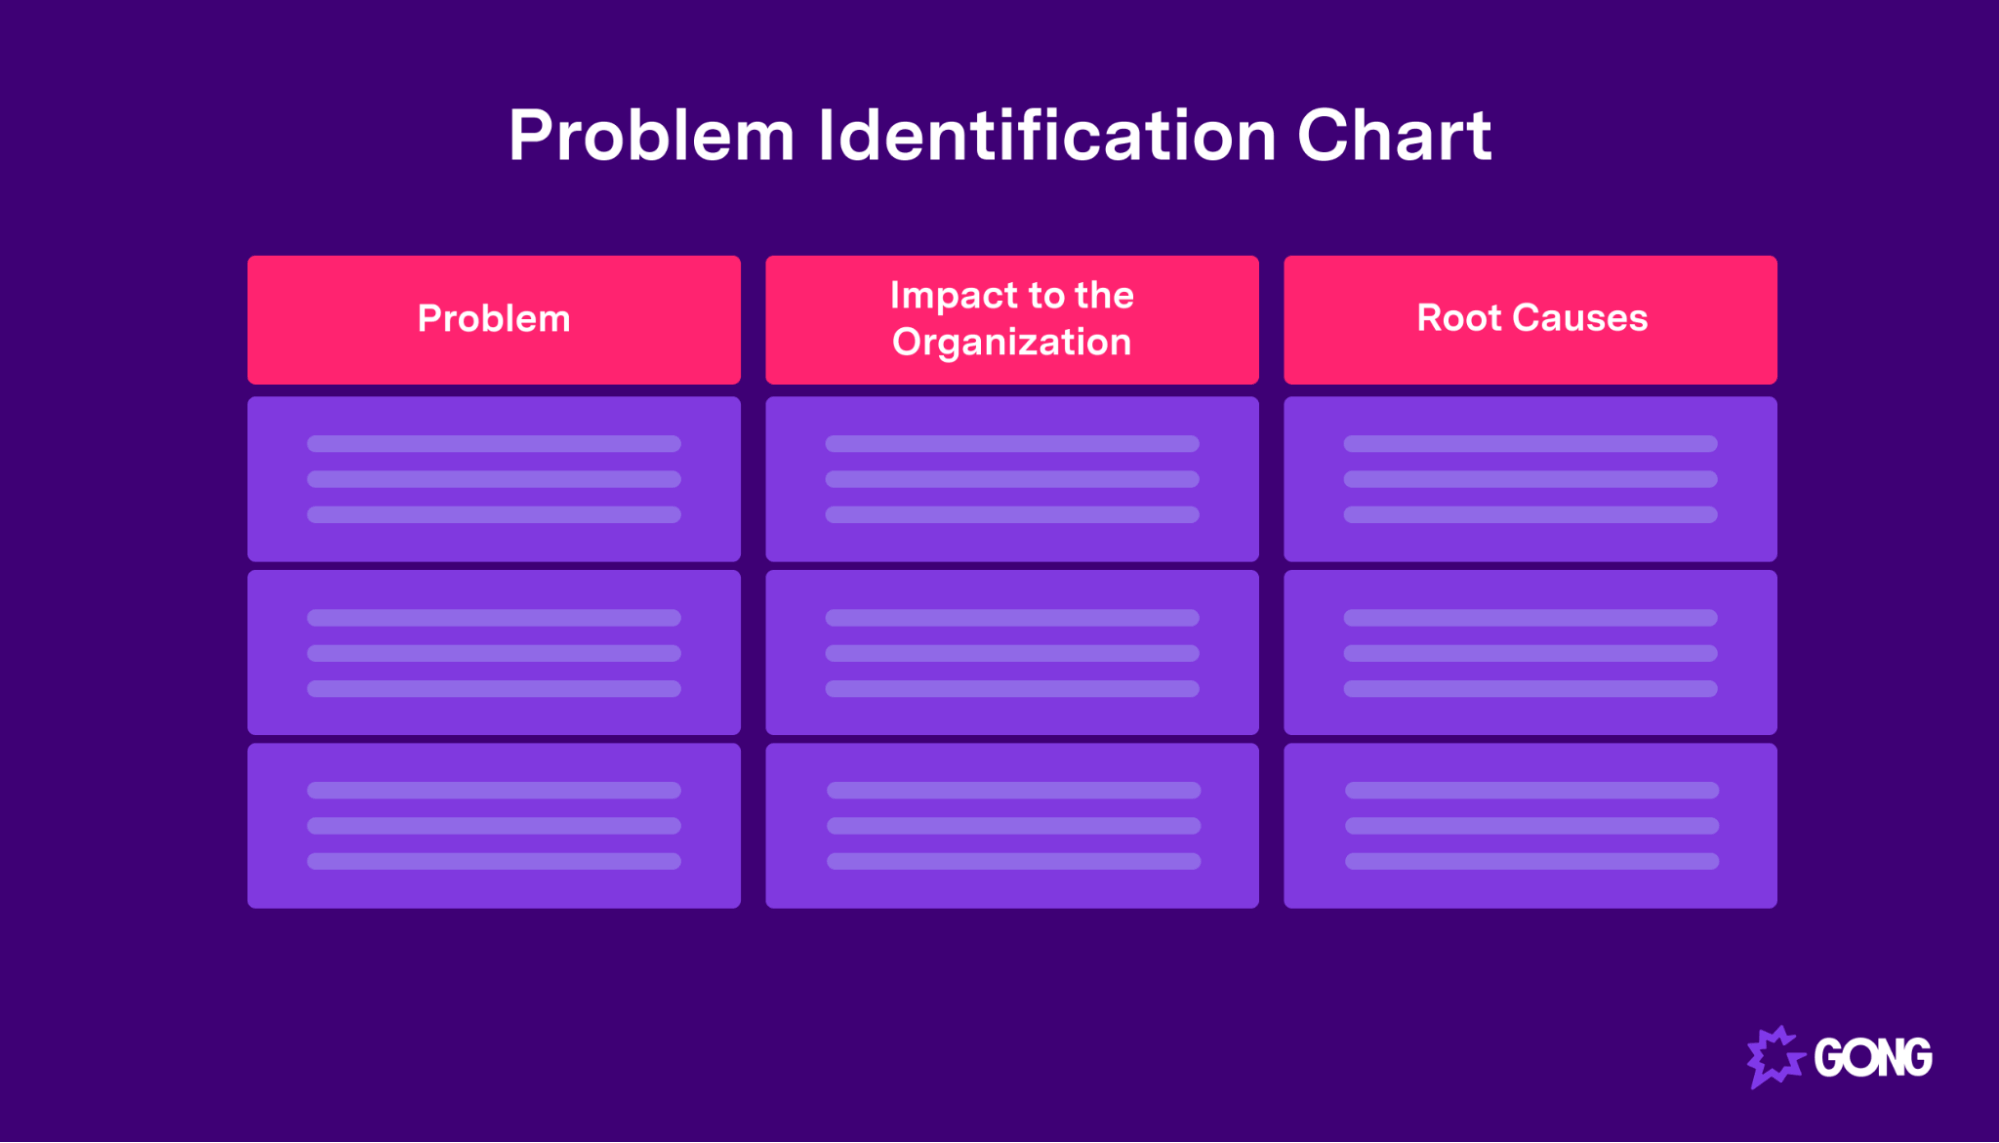 Example of a problem identification chart